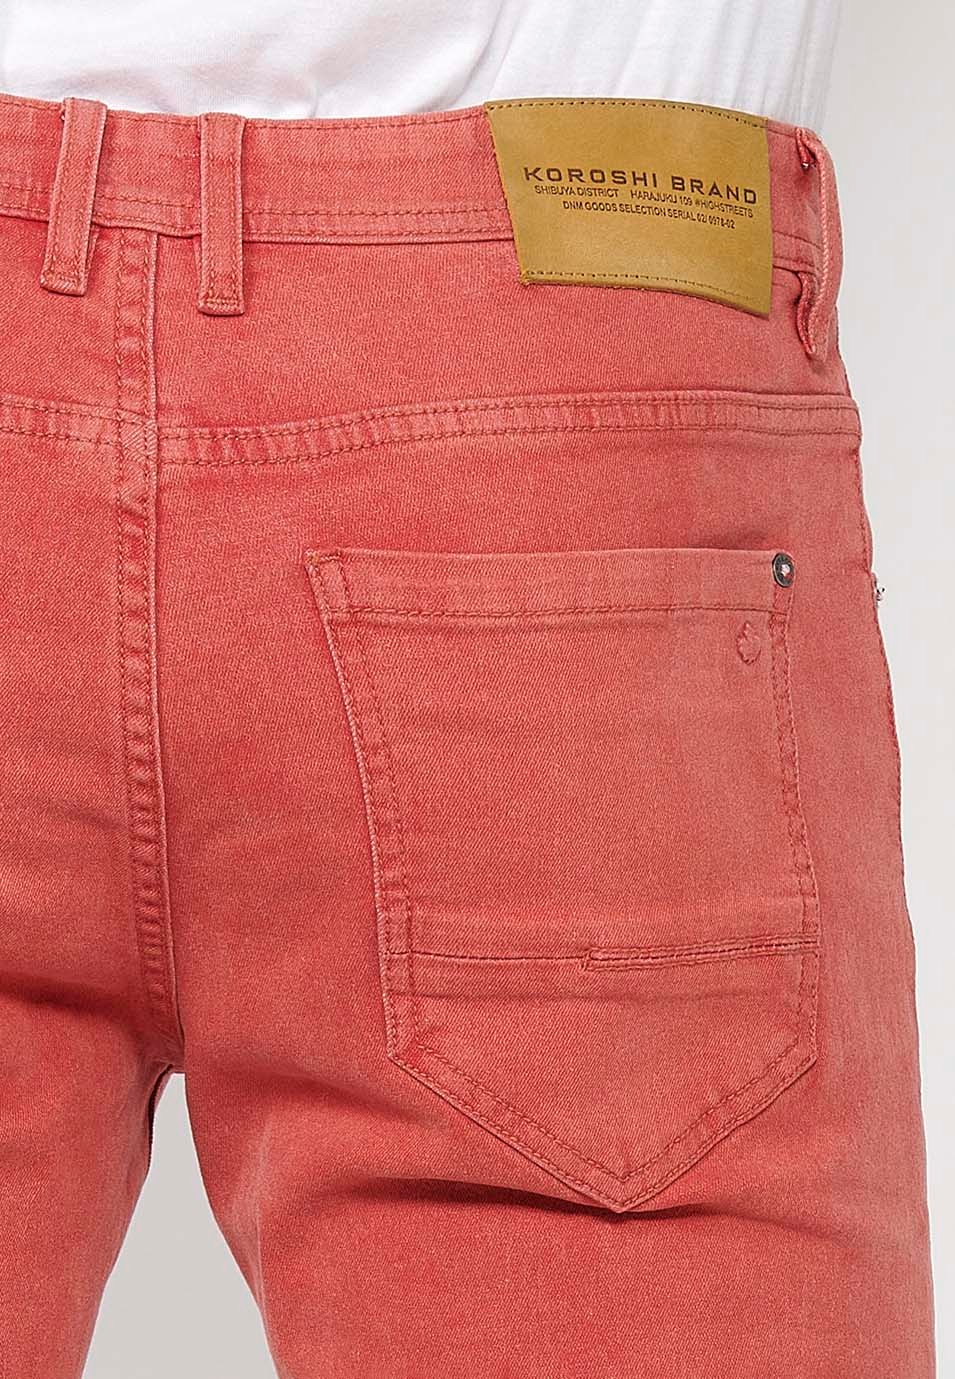 Shorts with a turn-up finish with front zipper and button closure and five pockets, one with a match pocket, in Red for Men 8